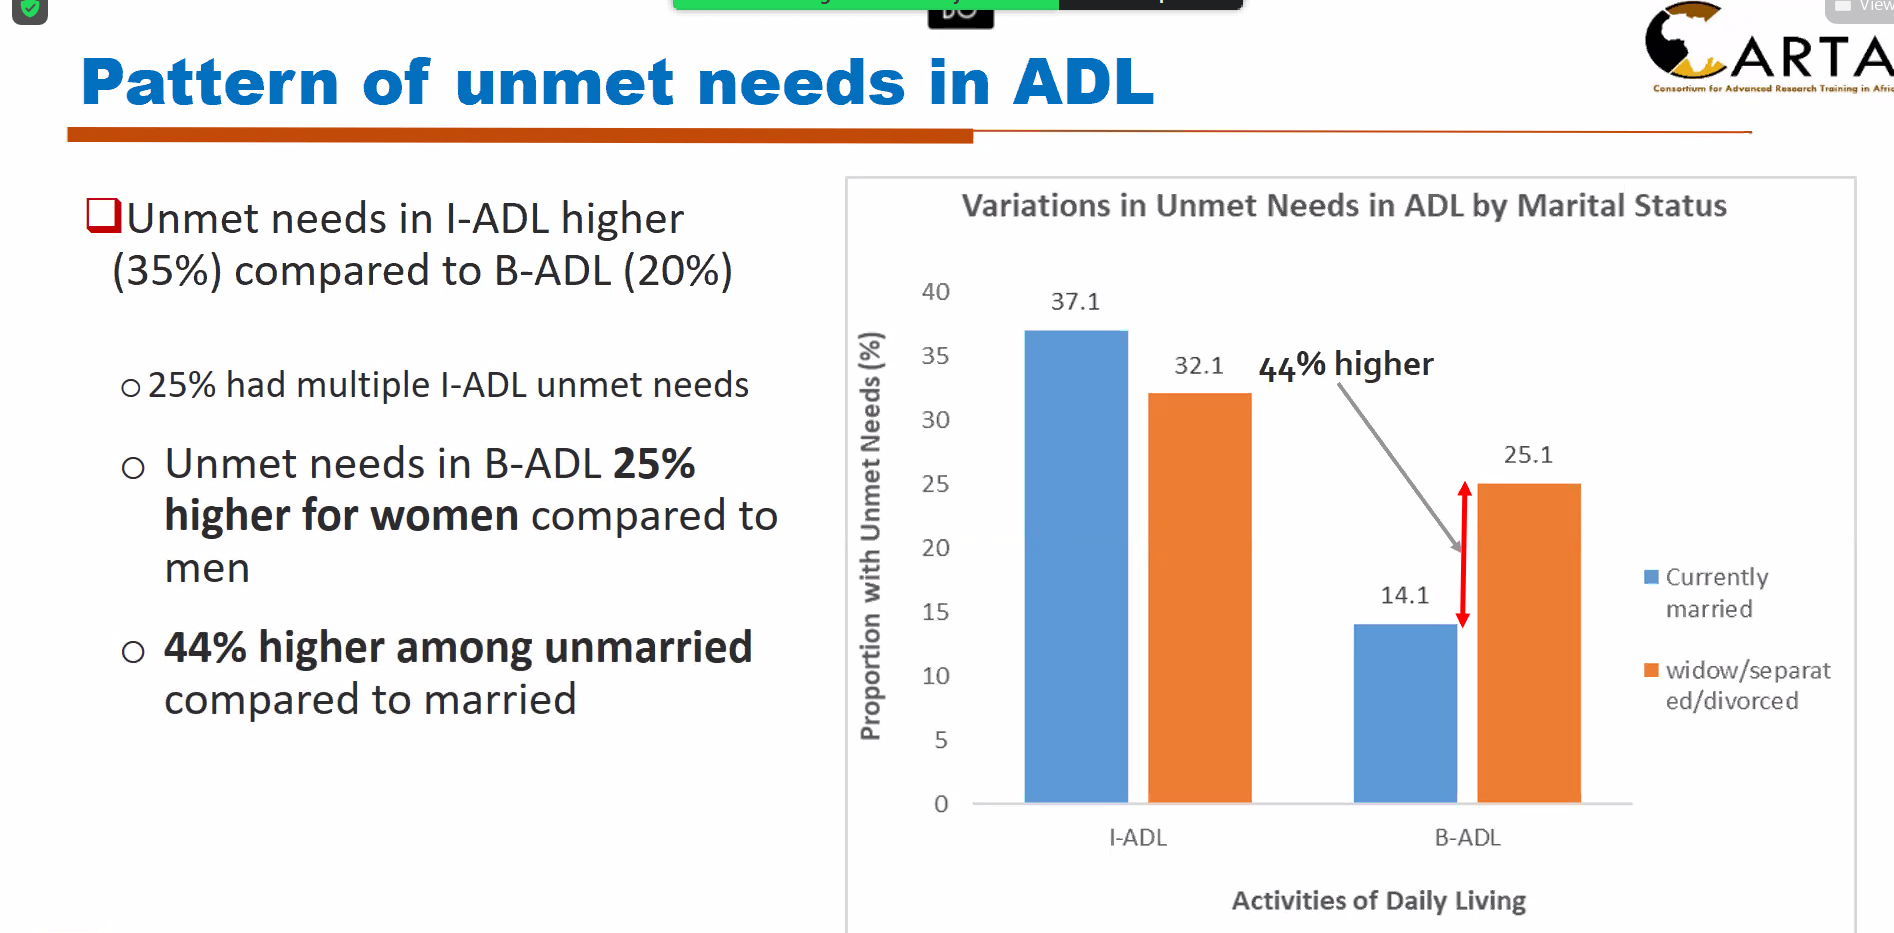 Pattern of unmet needs in Activities of Daily Living (ADL). Source: Charles Kato Drago/CARTA